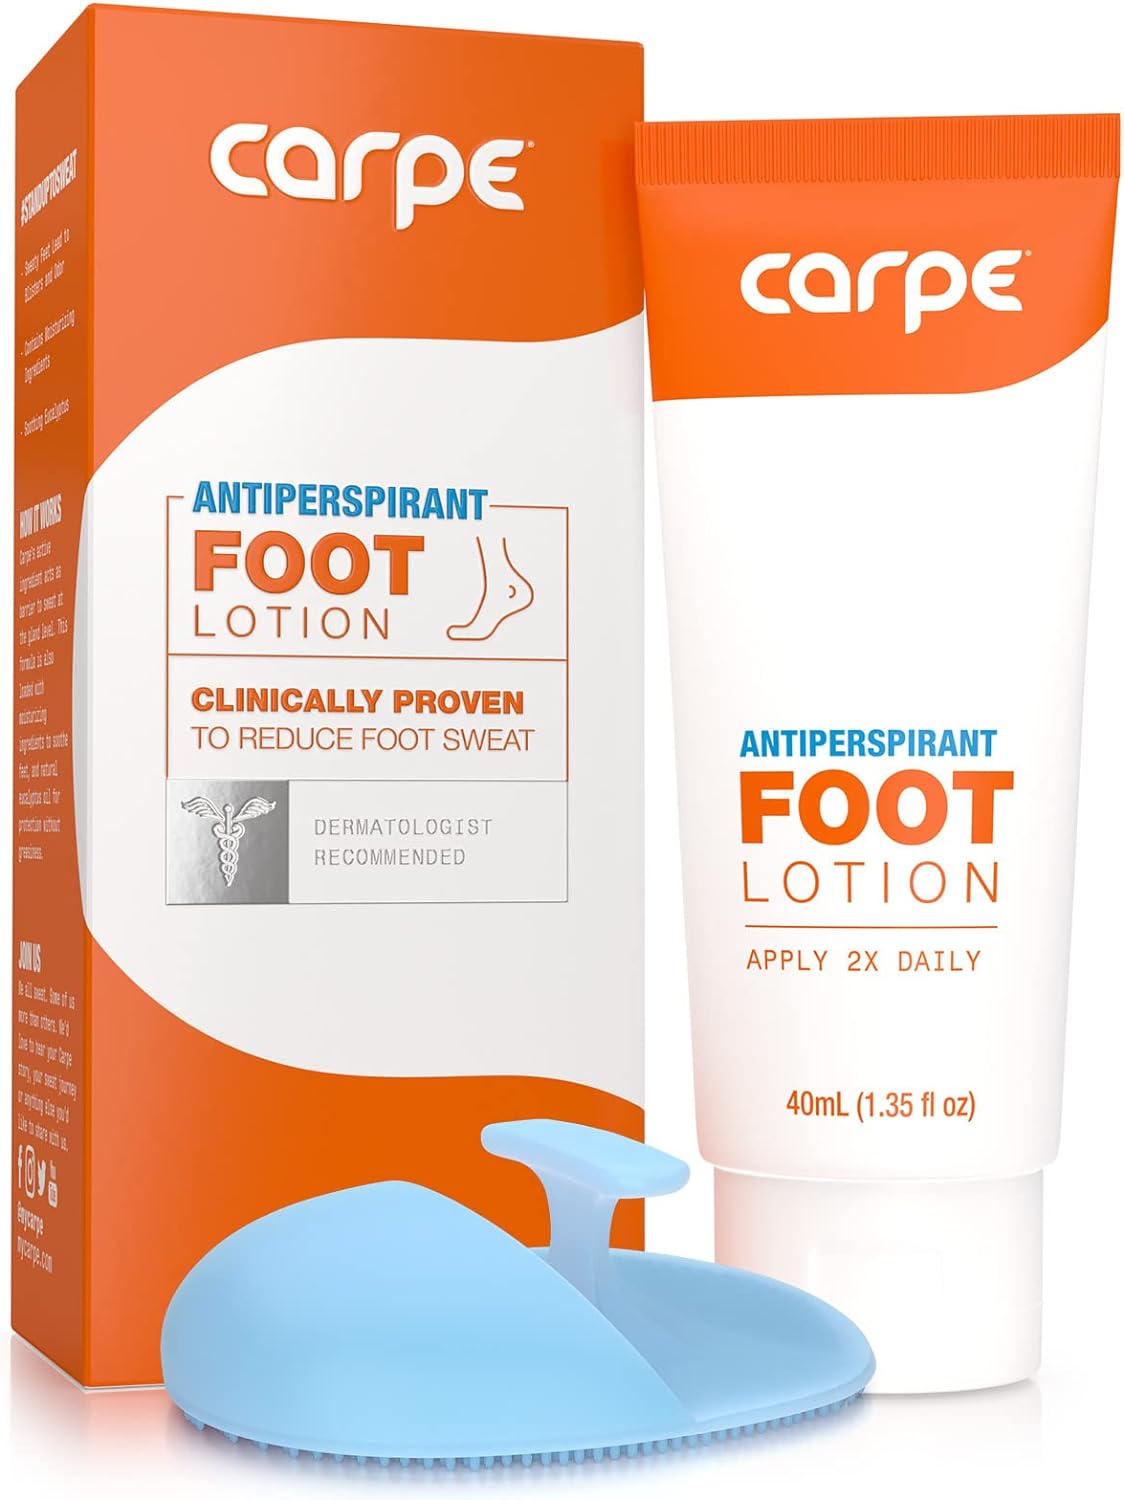 Carpe Antiperspirant Foot Lotion WITH APPLICATOR, A dermatologist-recommended solution to stop sweaty, smelly feet, Helps prevent blisters, Great for hyperhidrosis. 1 Tube + Applicator